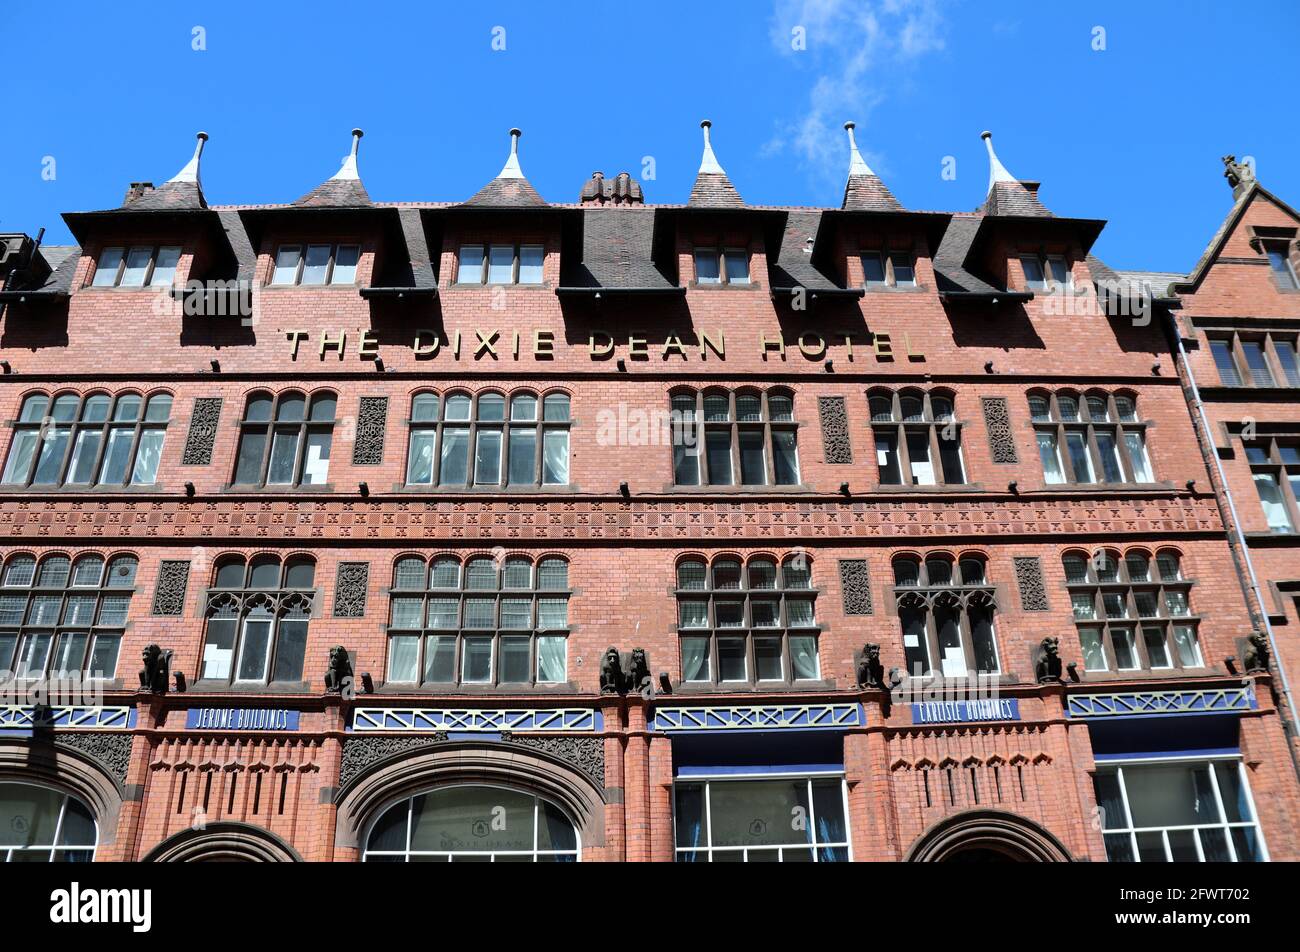 The Dixie Dean Hotel on Victoria Street in Liverpool Stock Photo